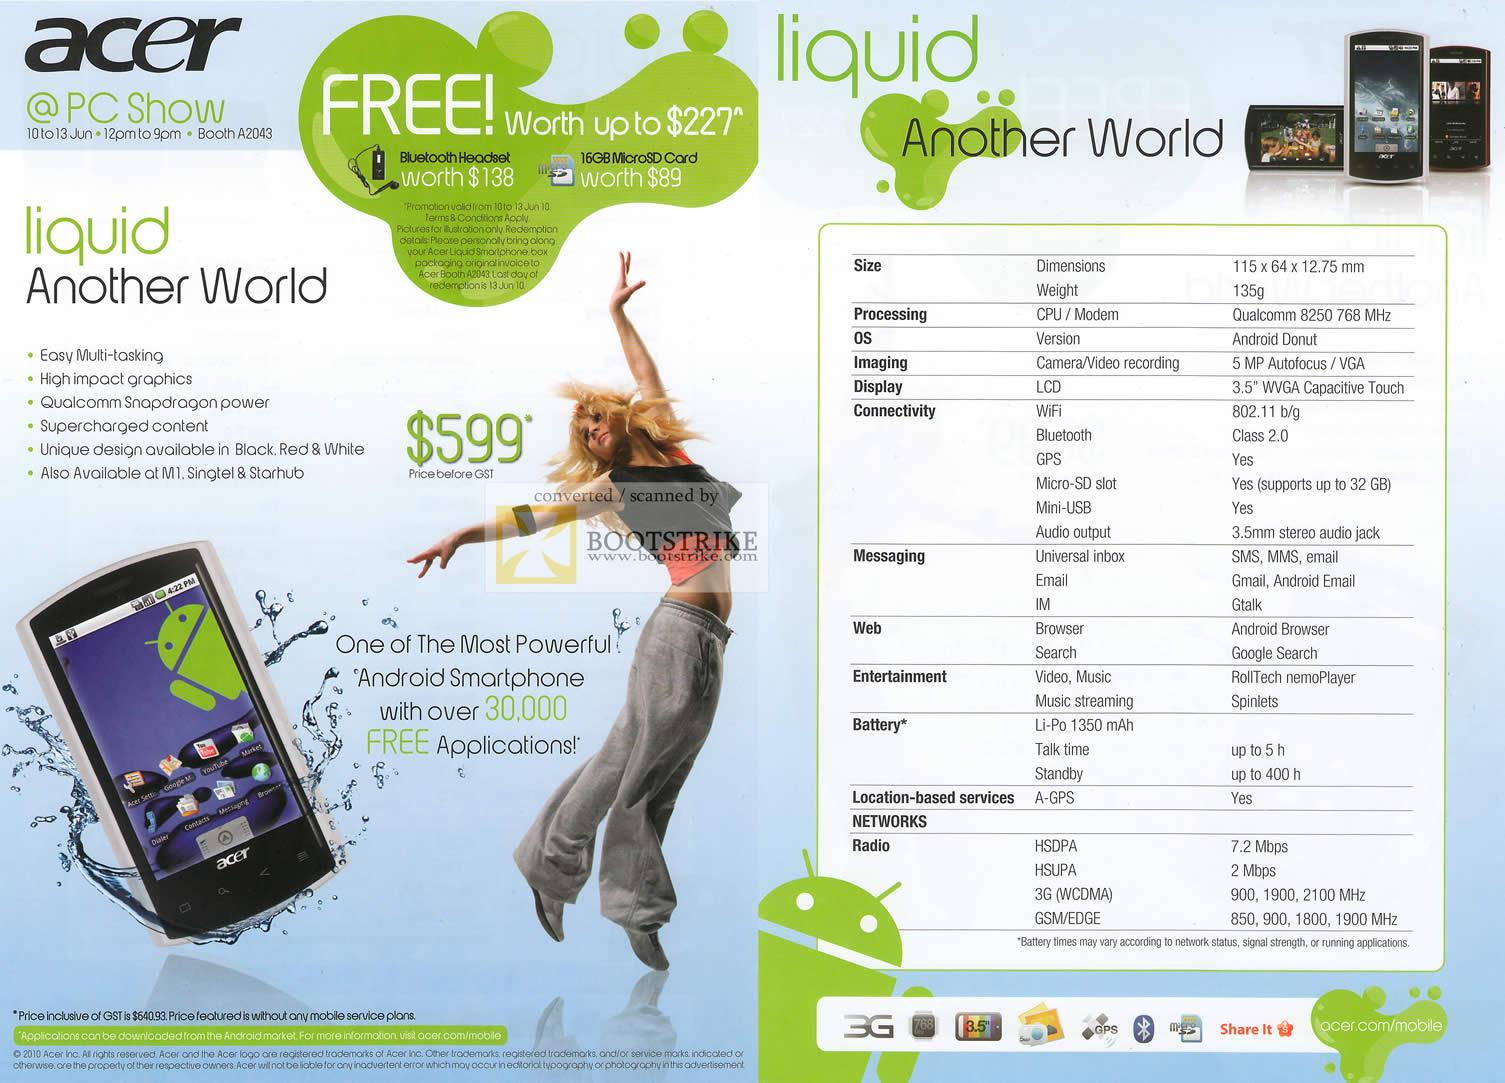 PC Show 2010 price list image brochure of Acer Liquid Smartphone GPS Android